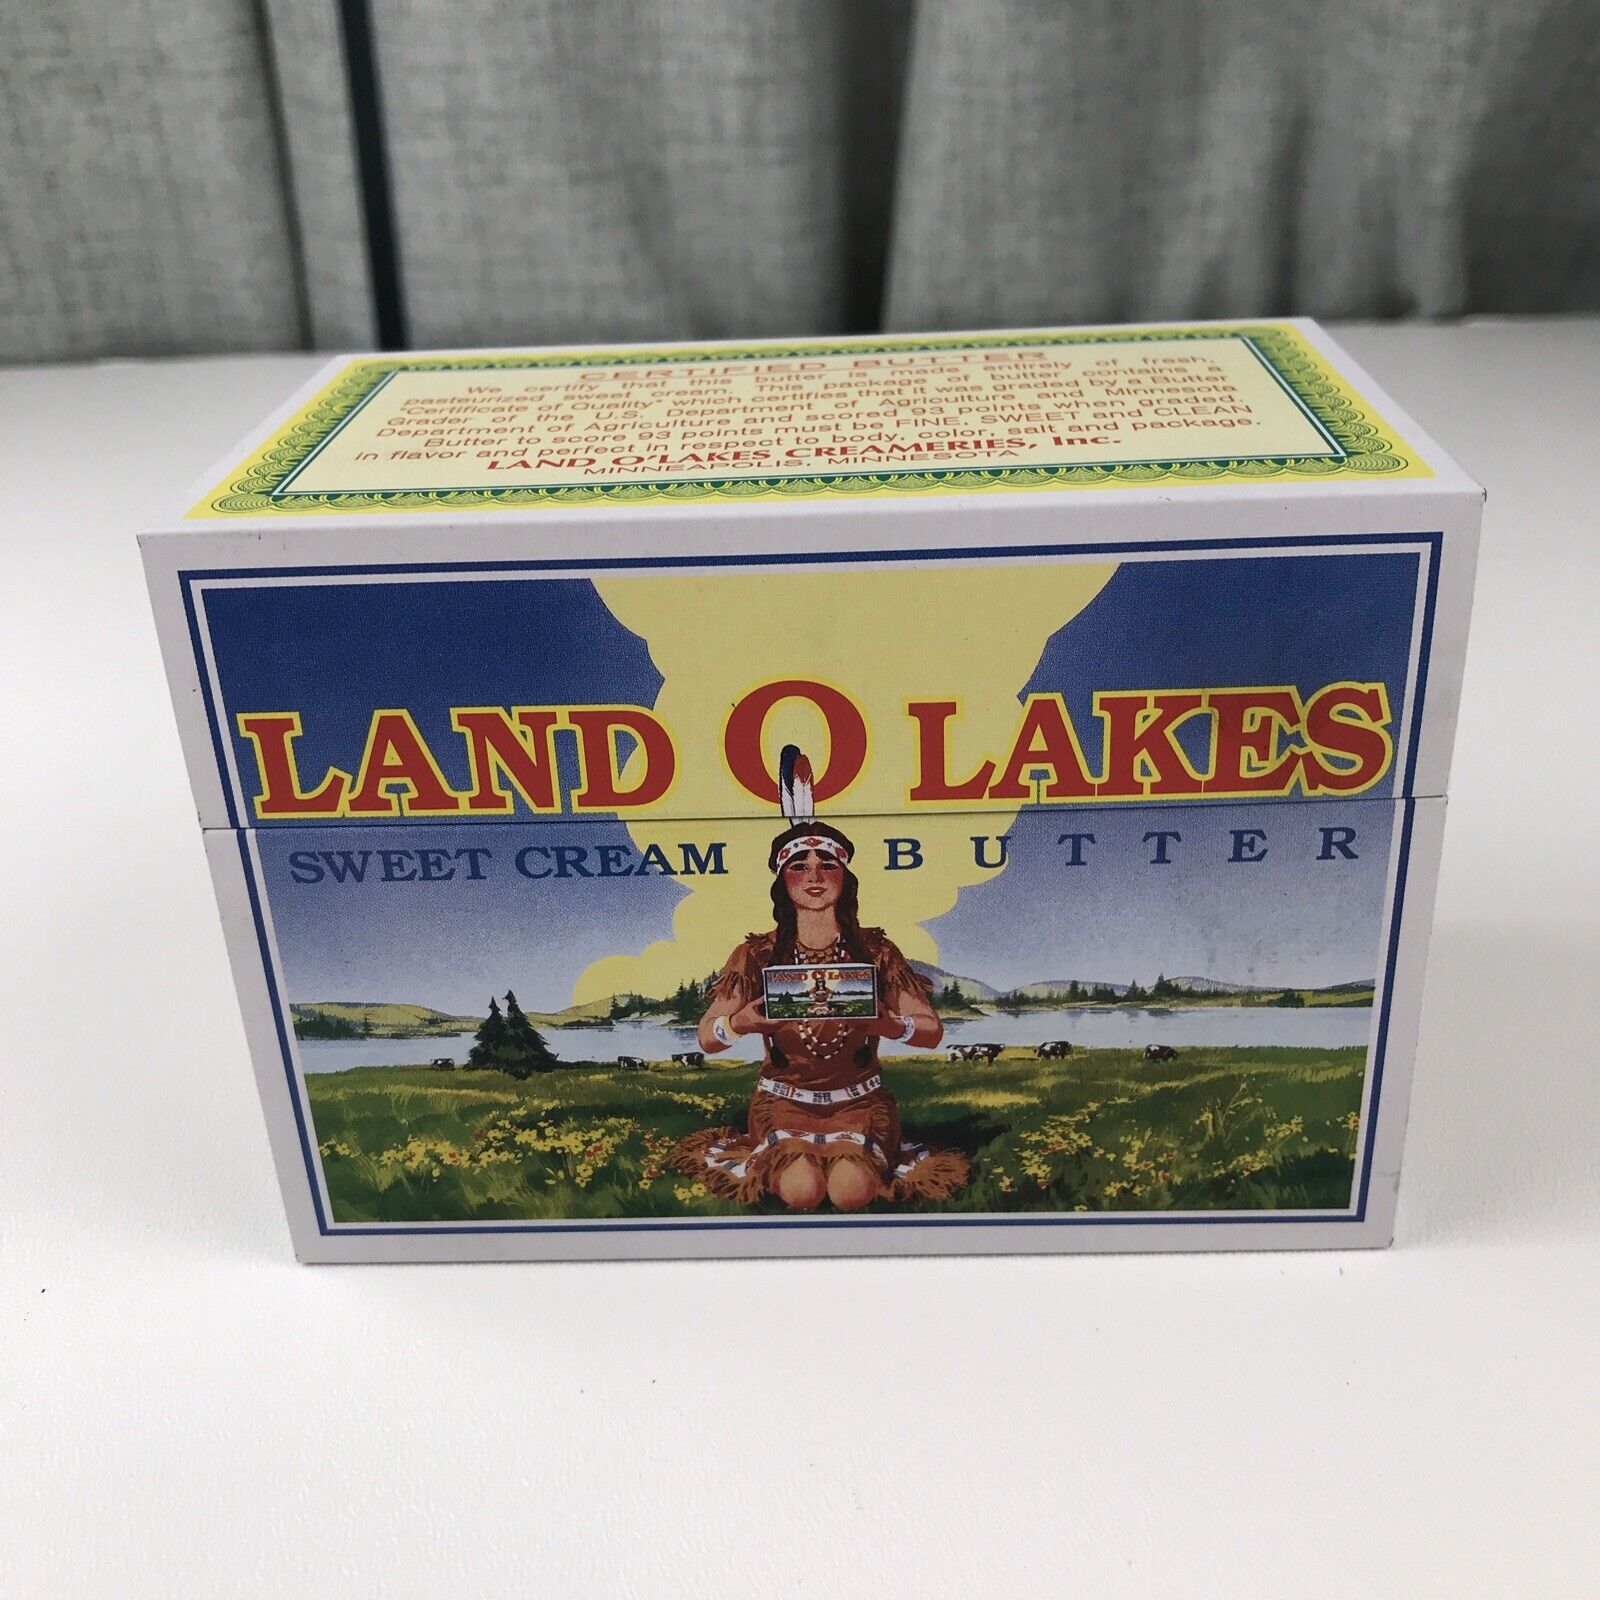 Vintage Land O Lakes Butter Recipe Box with Cards Wrapped. Thank You Letter